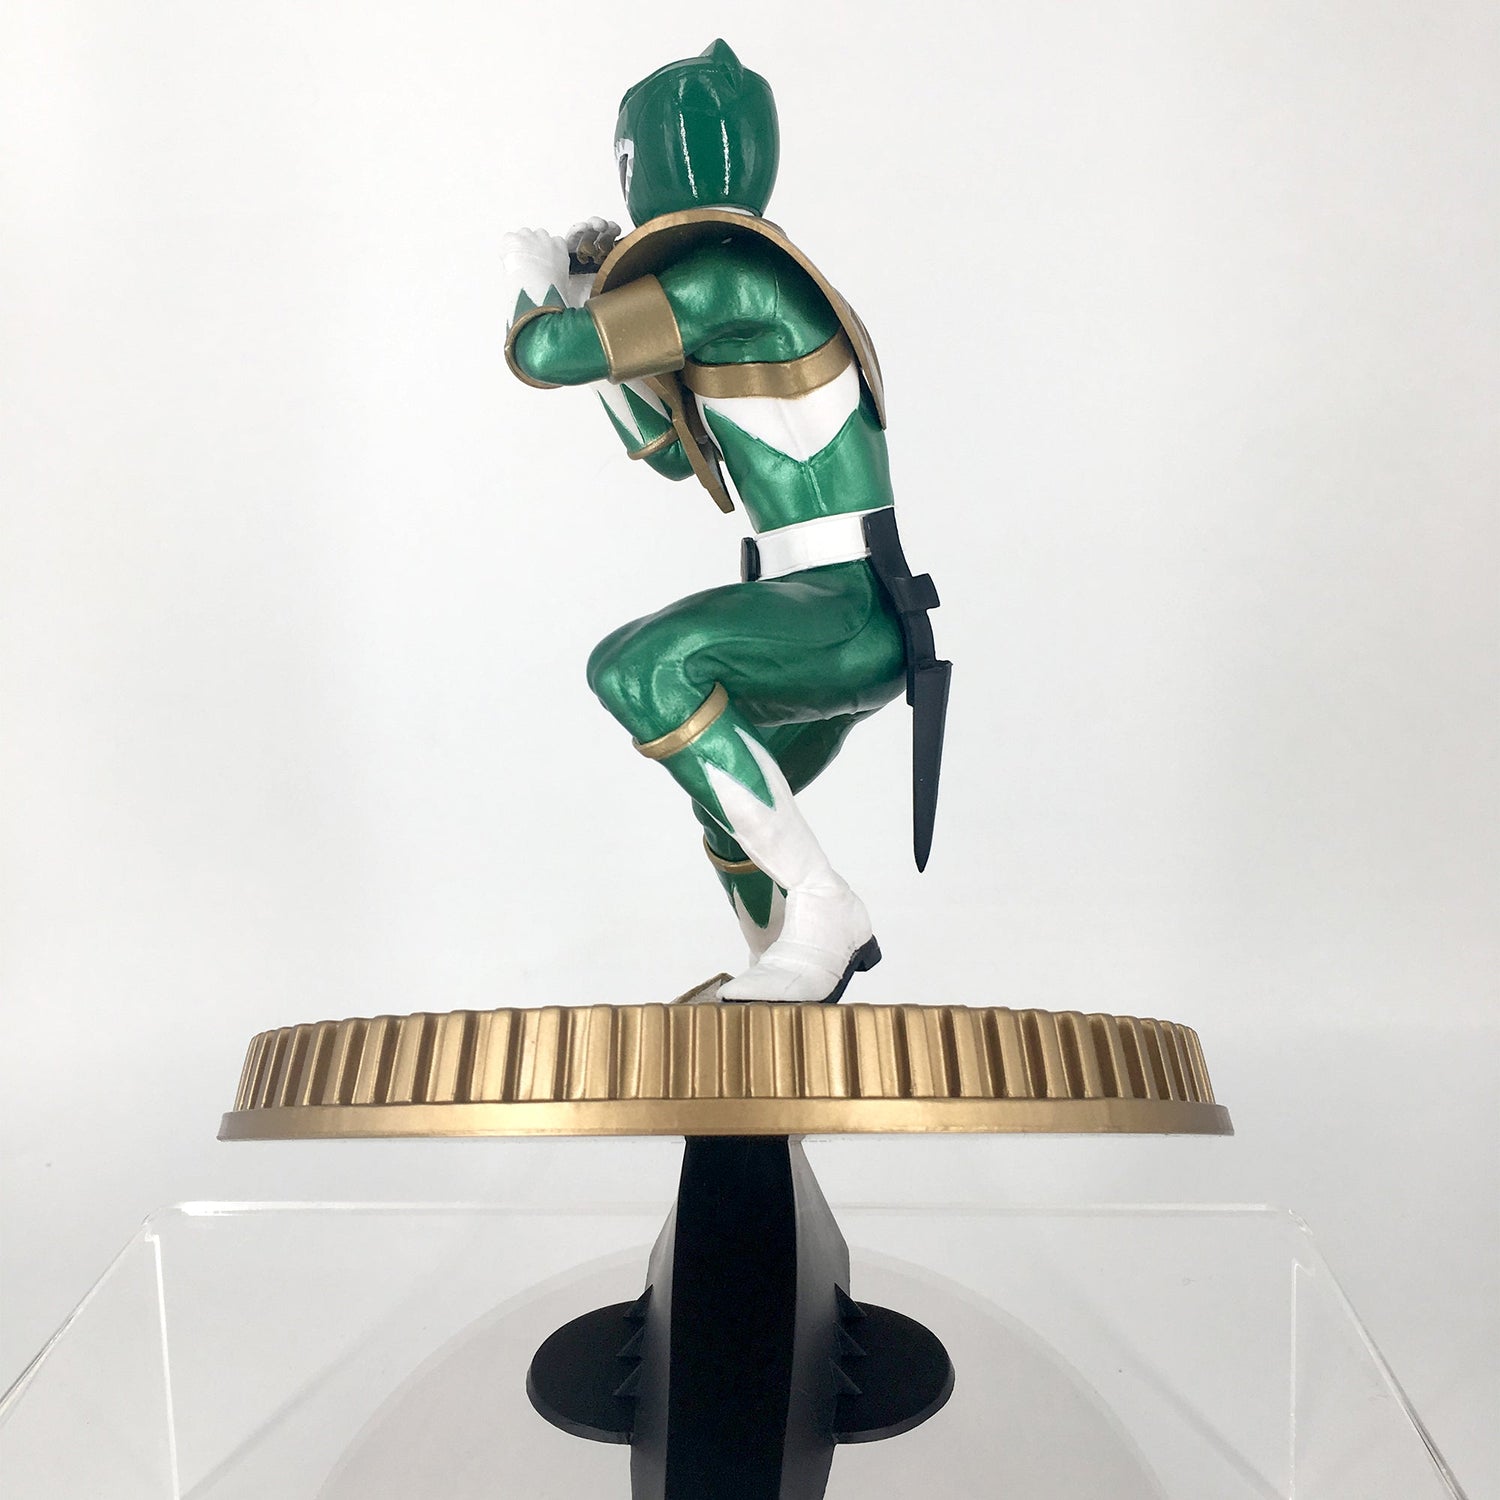 Mighty Morphin Power Rangers Green Ranger Collectible Figure By PCS Collectibles